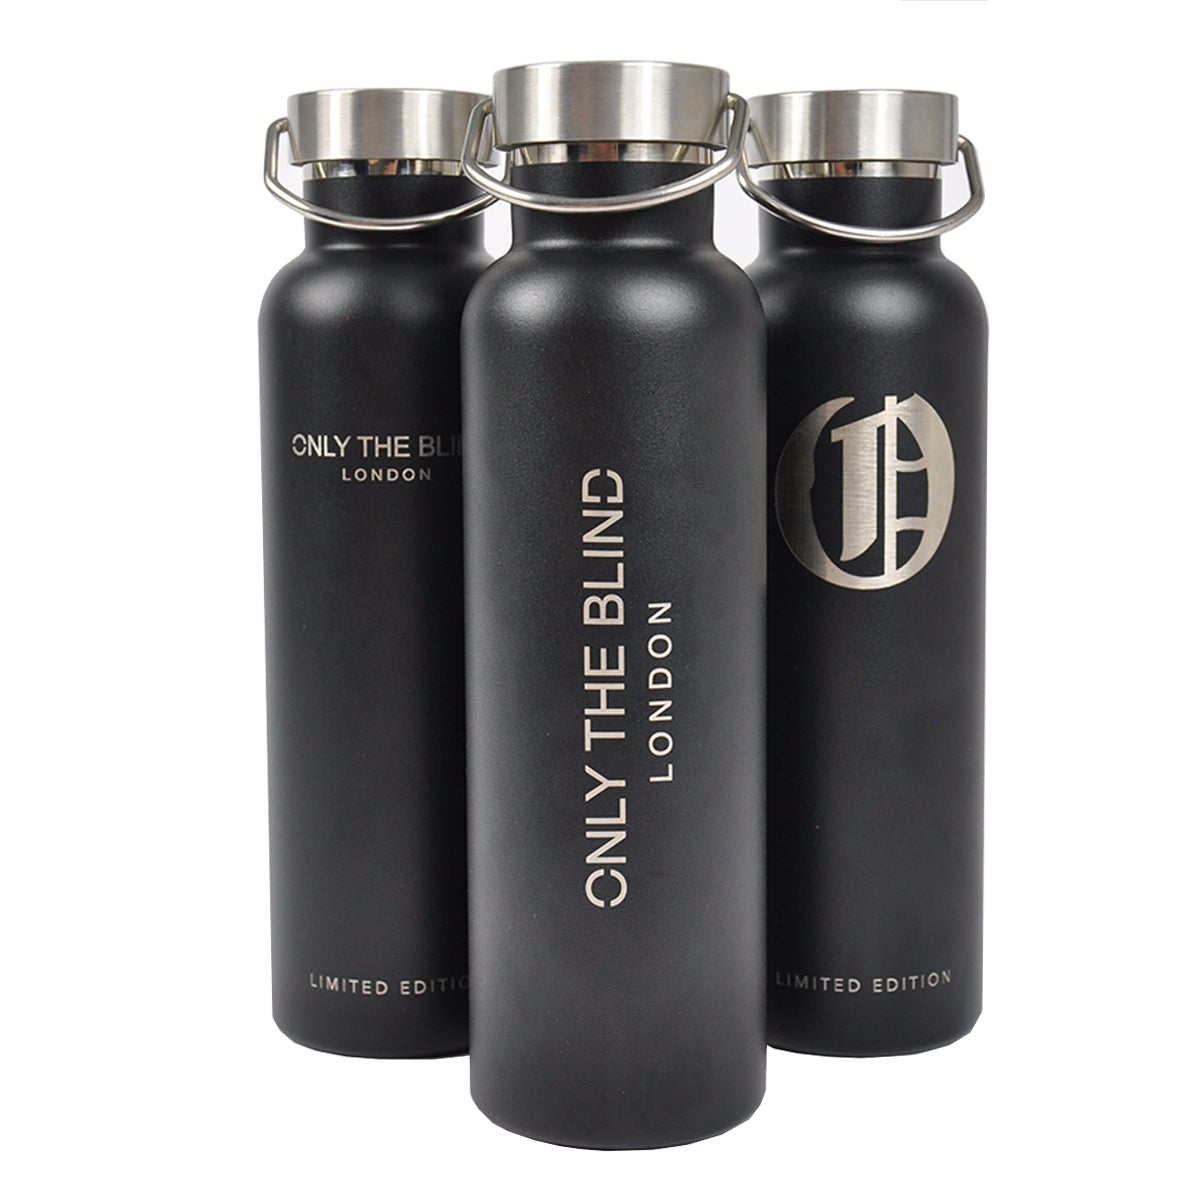 Statement Stainless Steel Flask